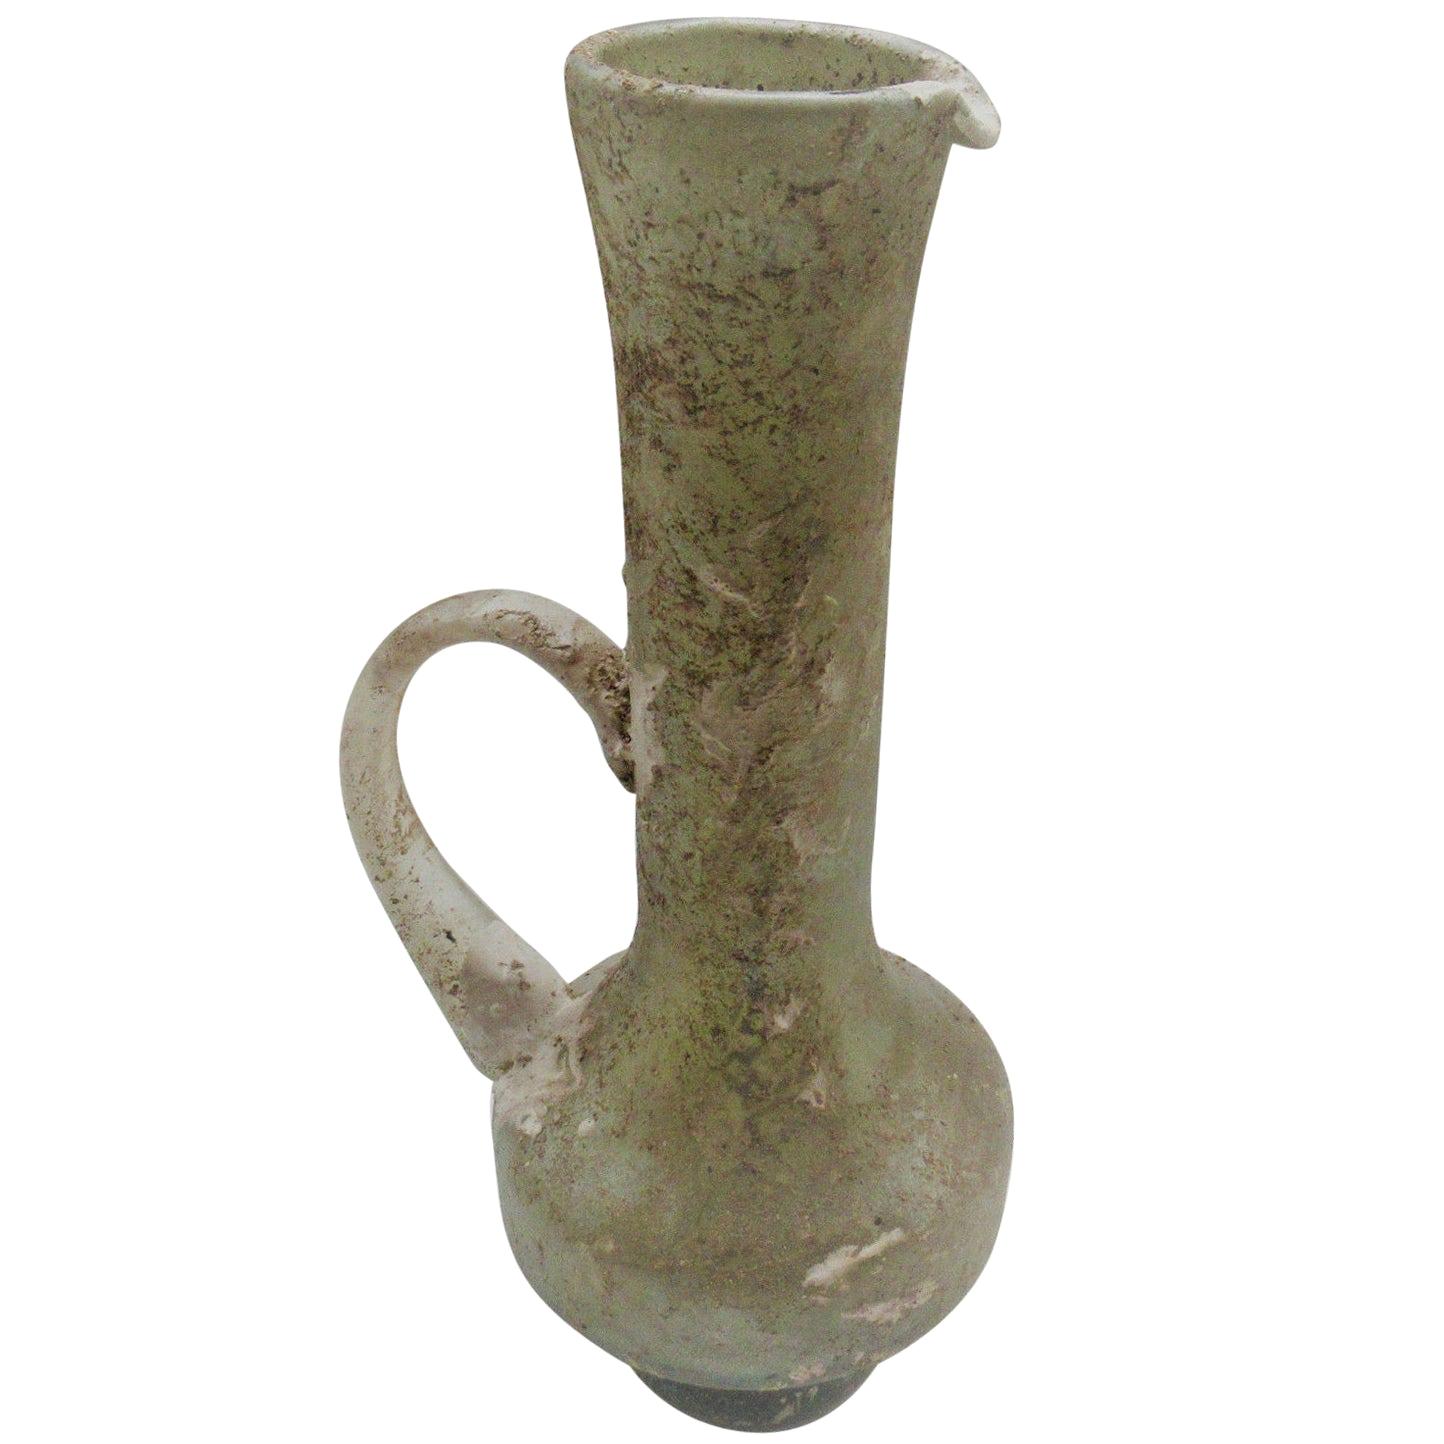 Roman, Ancient, 200-300 AD, Museum Quality, Glass Juggle, Ancient Roman Glass For Sale